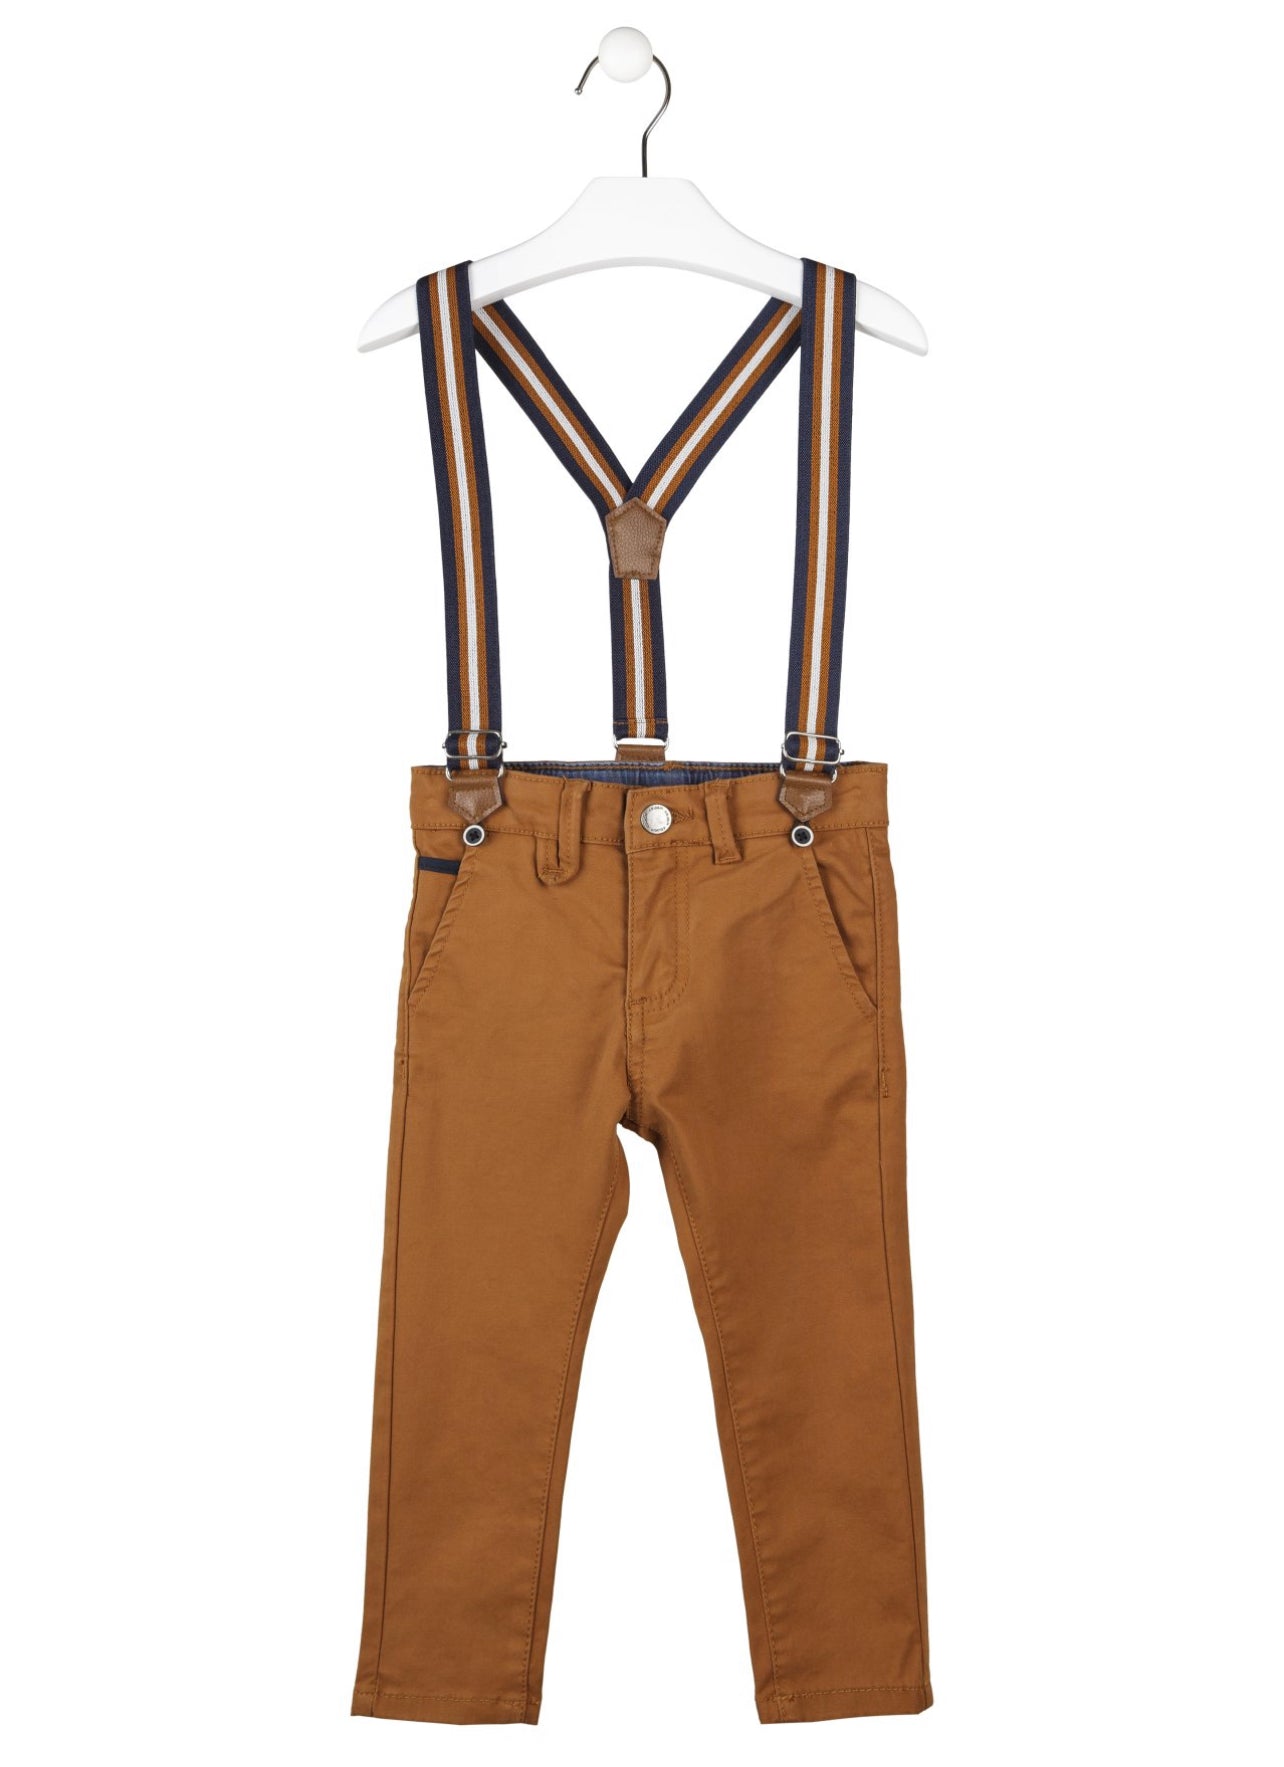 Nathan Trousers, Shirt and Tie Set with Braces Blue | Boys' Suits & Sets |  Monsoon Global.